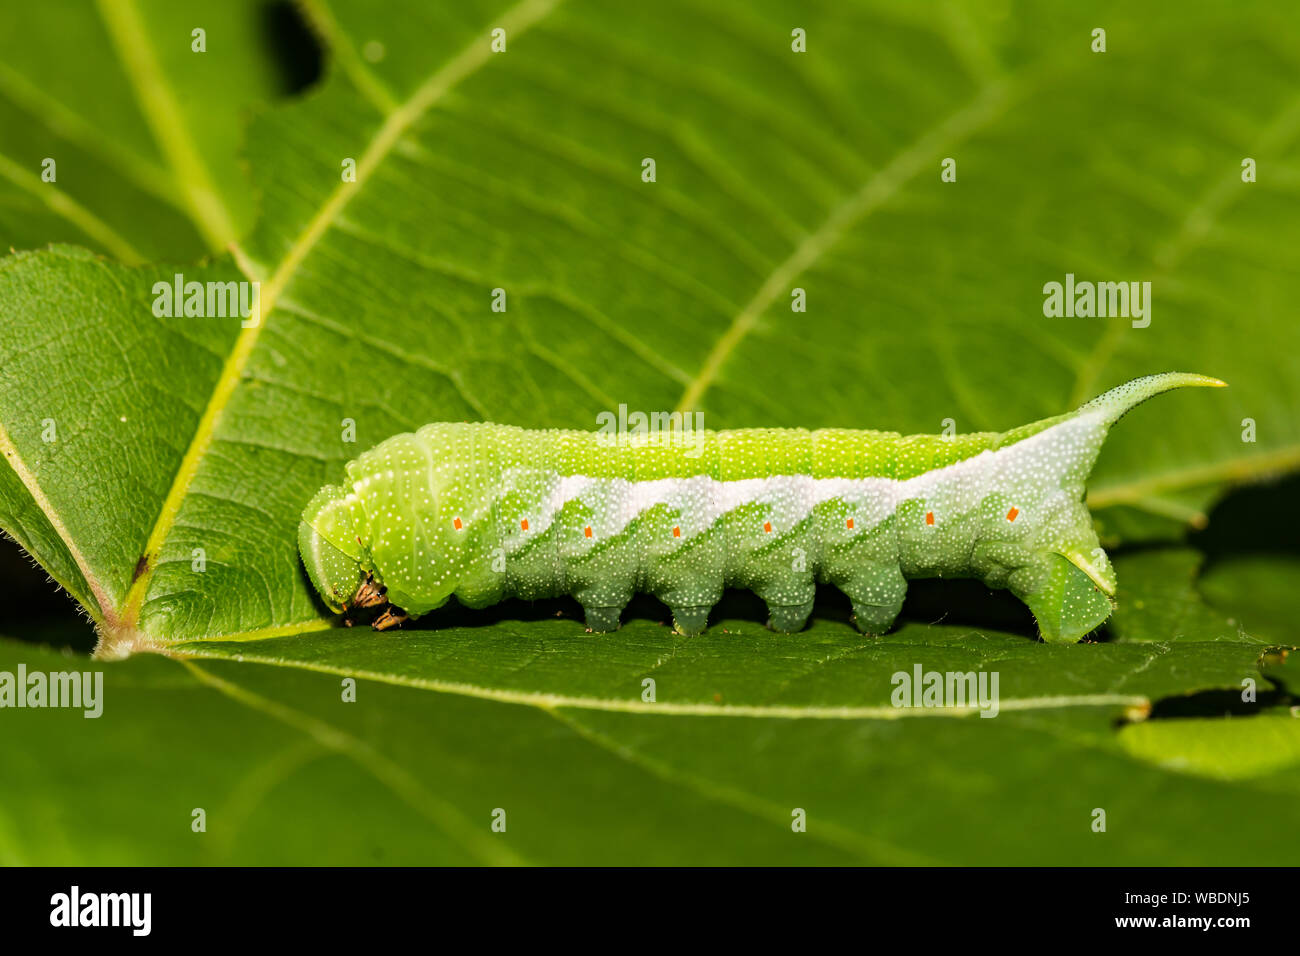 Species Creeper Has One Meaning Very Stock Photo 623847305